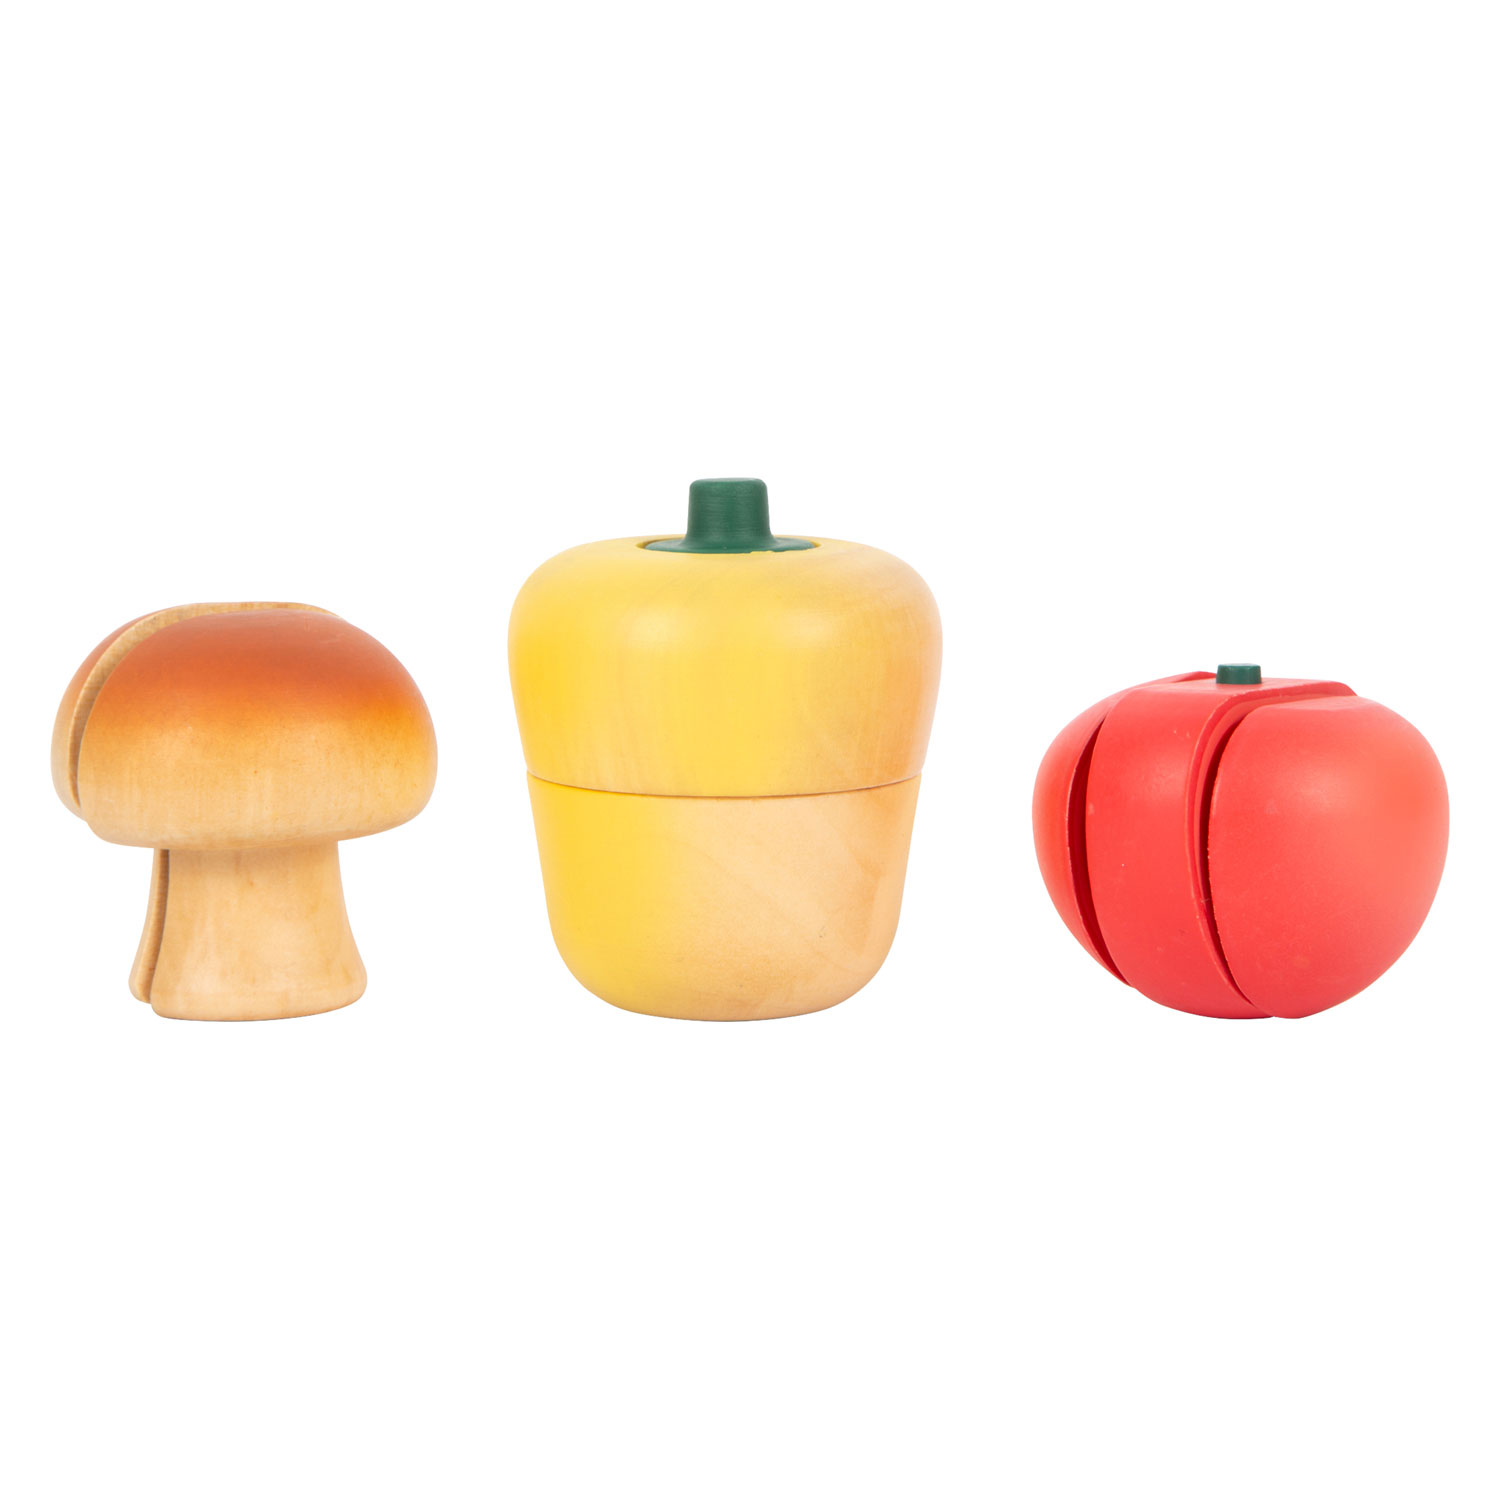 Small Foot - Cut and Play Food-Gemüse-Set aus Holz, 13dlg.